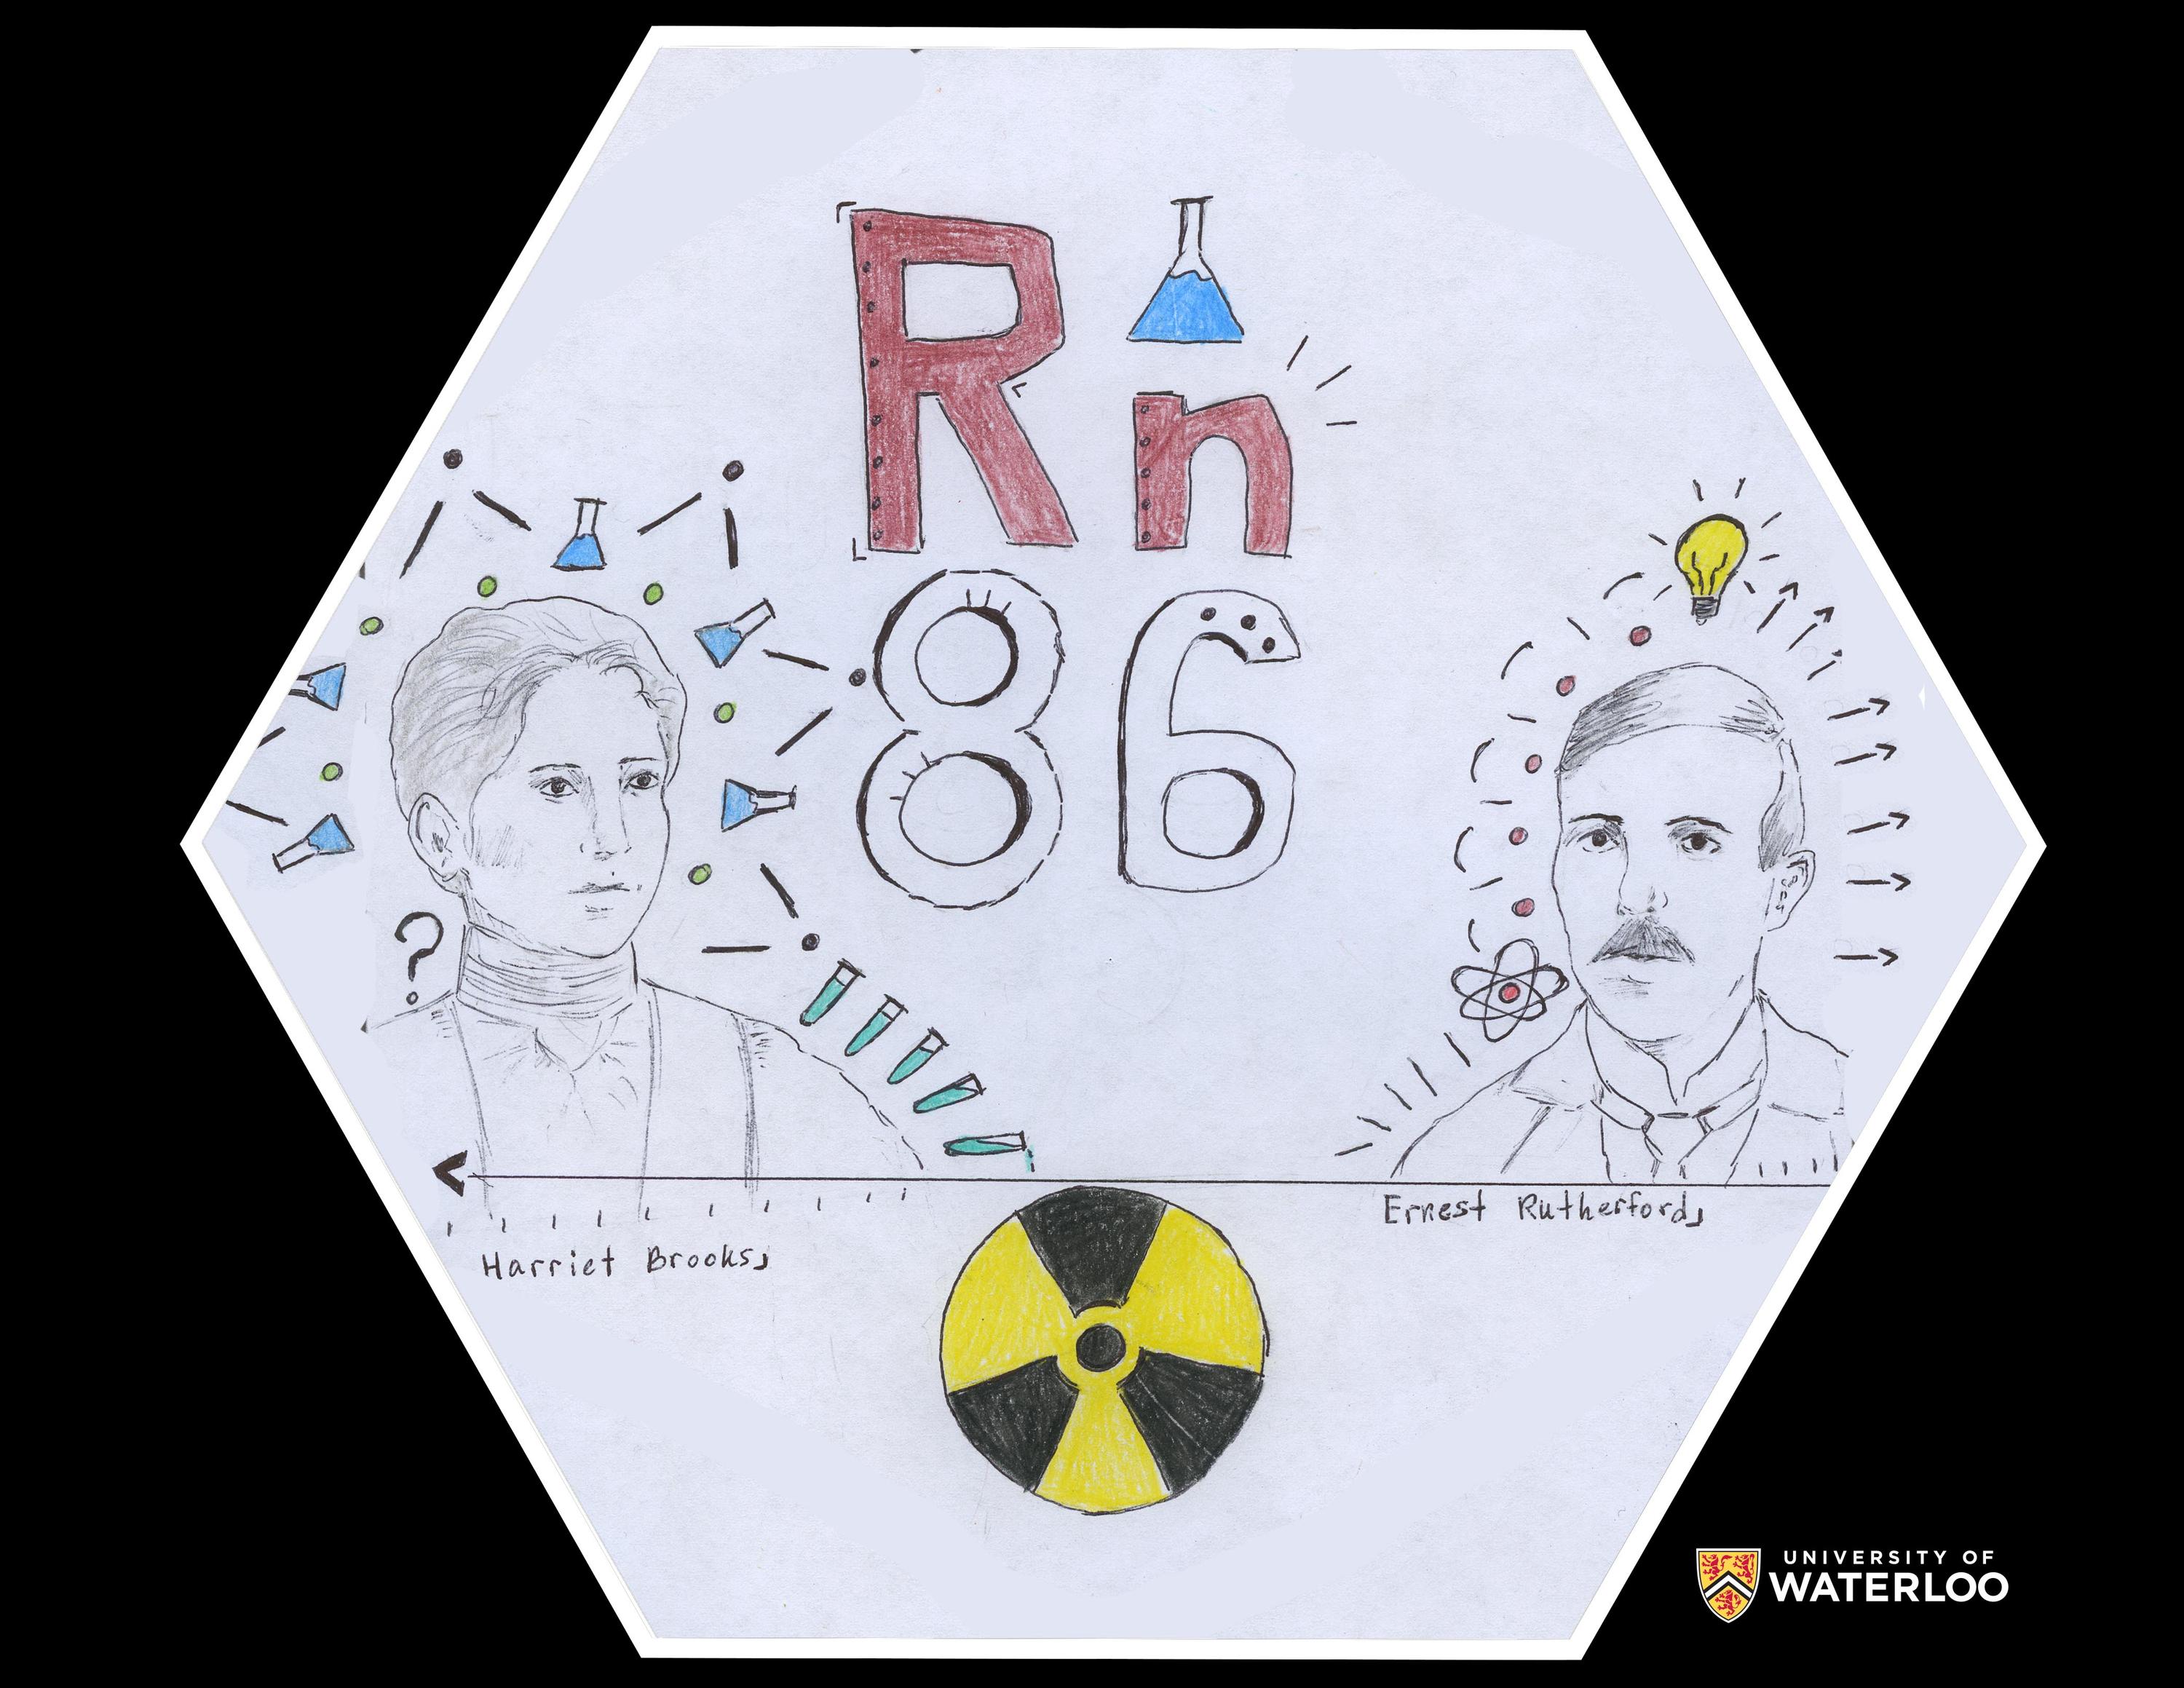 Coloured pencil on white paper. The chemical symbol “Rn” and “86” appear centre. A small, blue Erlenmeyer flask sits above. Harriet Brooks is illustrated left; Ernest Rutherford right. At the bottom is a radioactive symbol.